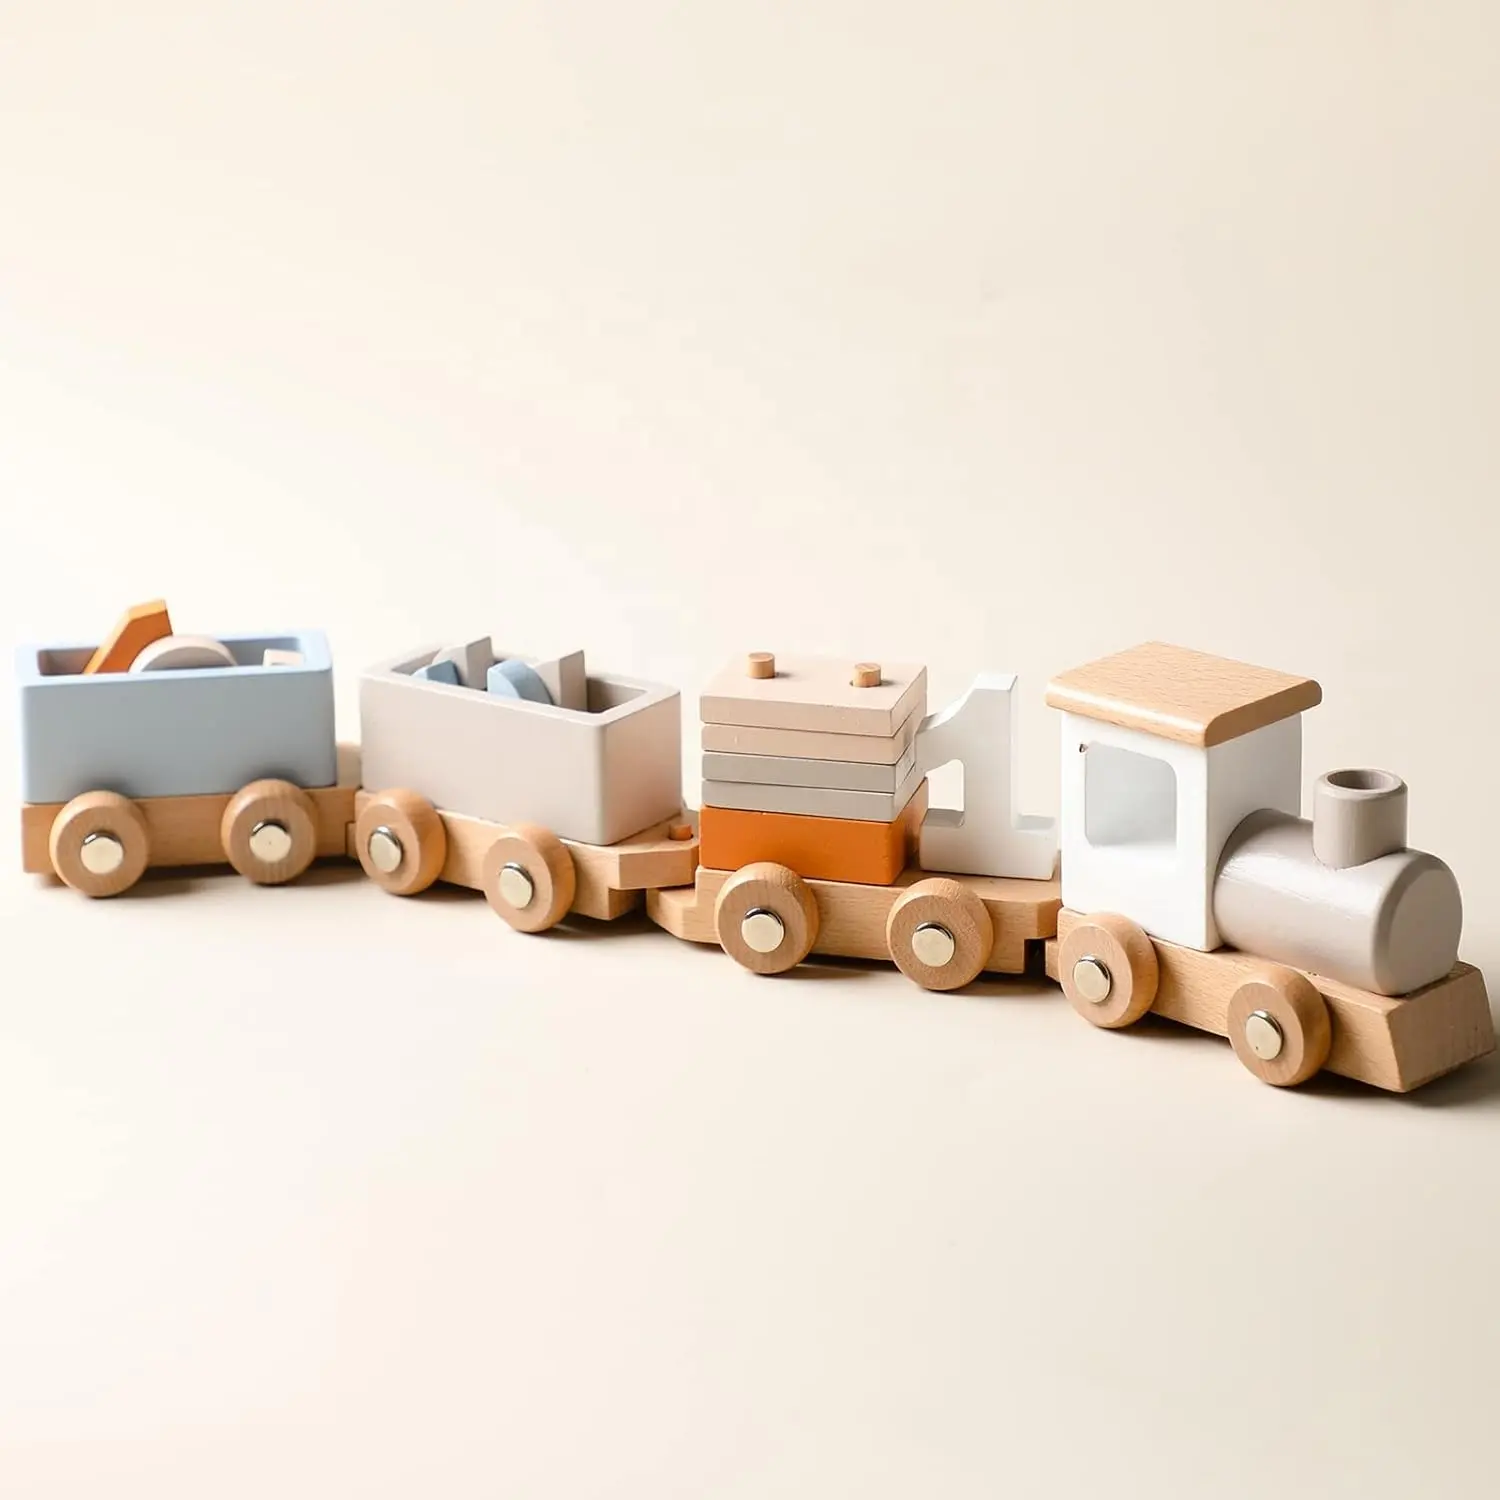 Wooden Train toys for toddlers1-3 classic wooden cars with numbers and blocks for boys girls 1 2 3 4 5 birthday gift